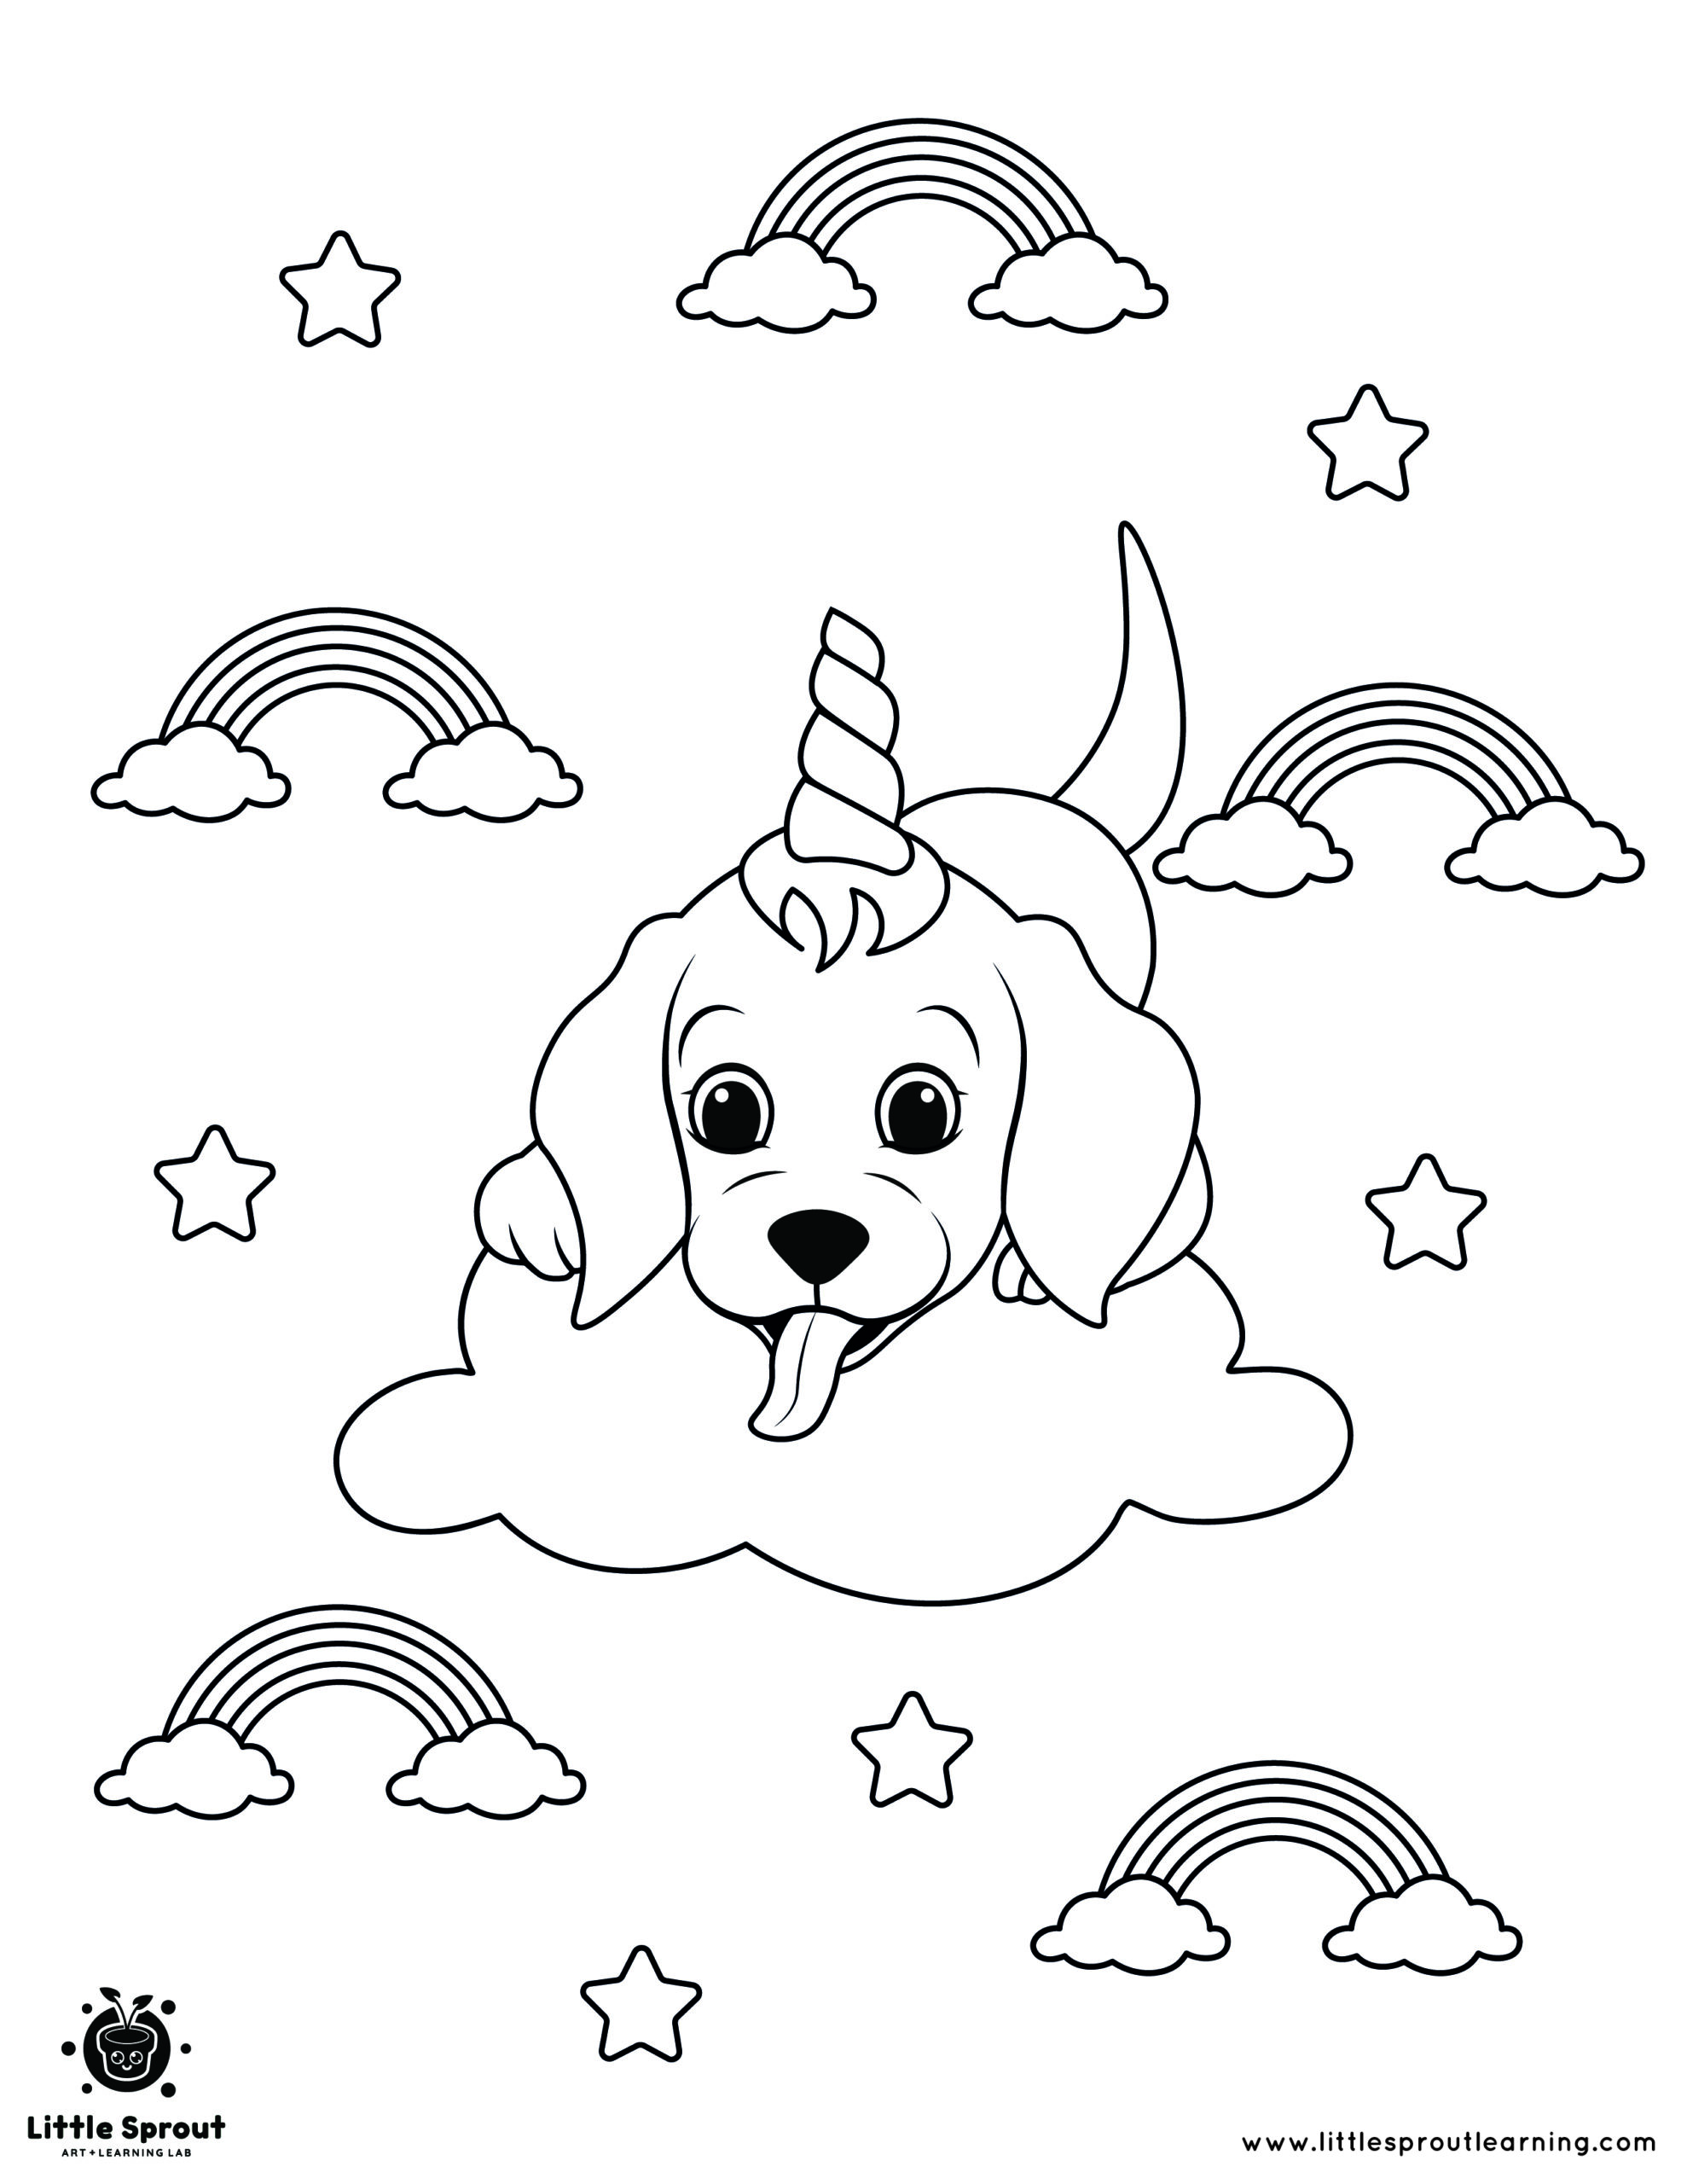 Rainbows and a unicorn dog coloring page